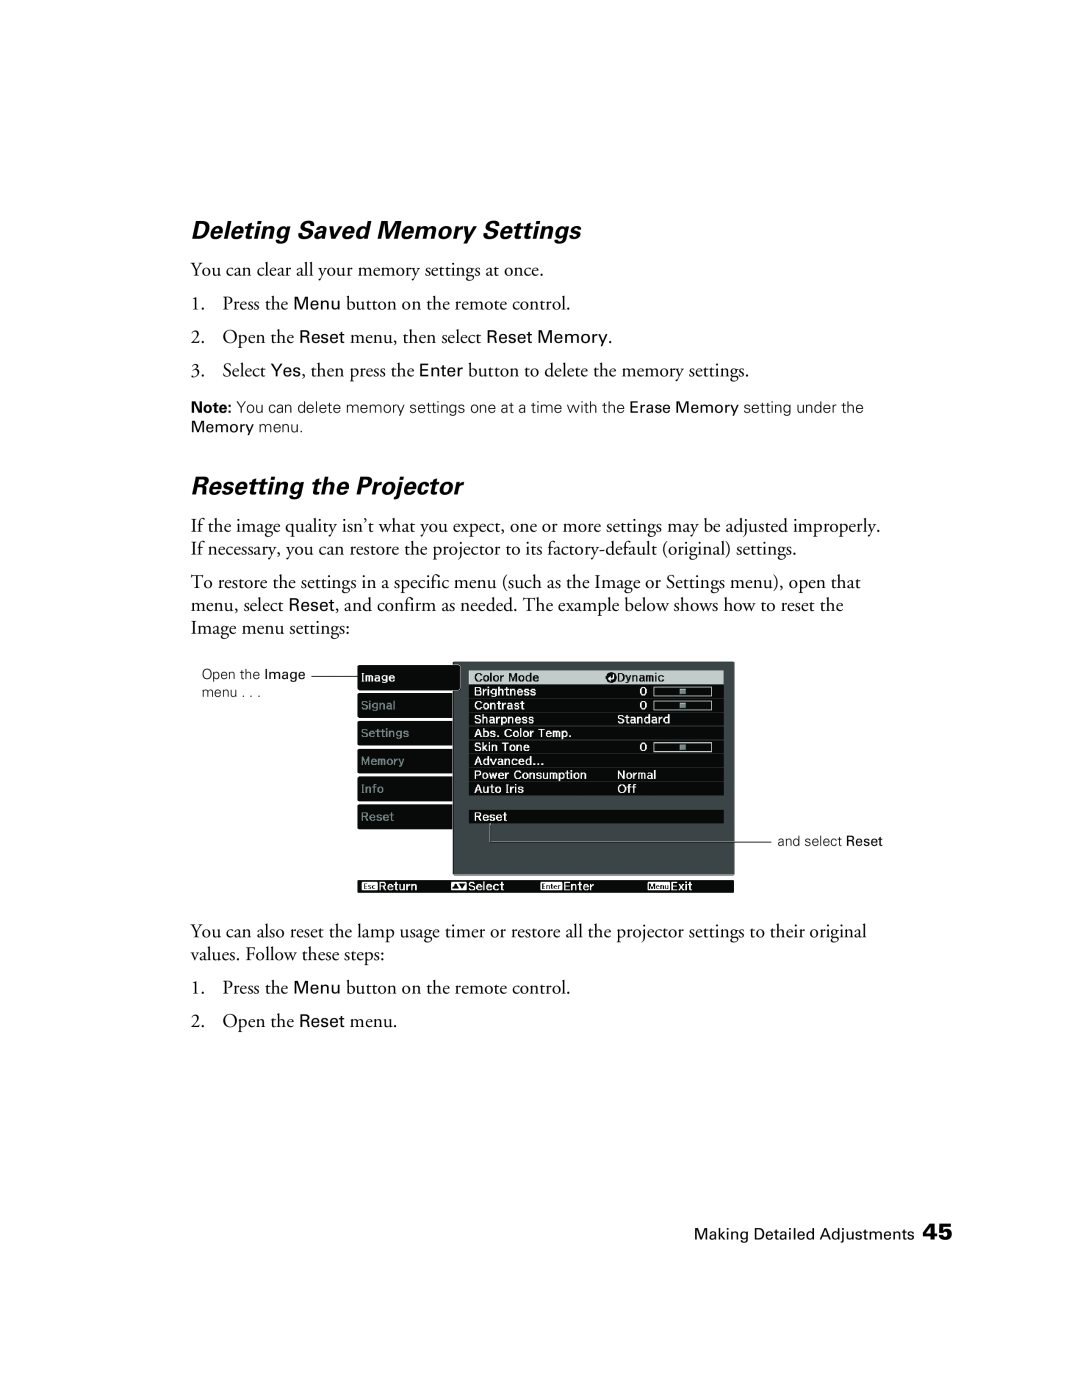 Epson 9700, 9350 manual Deleting Saved Memory Settings, Resetting the Projector 